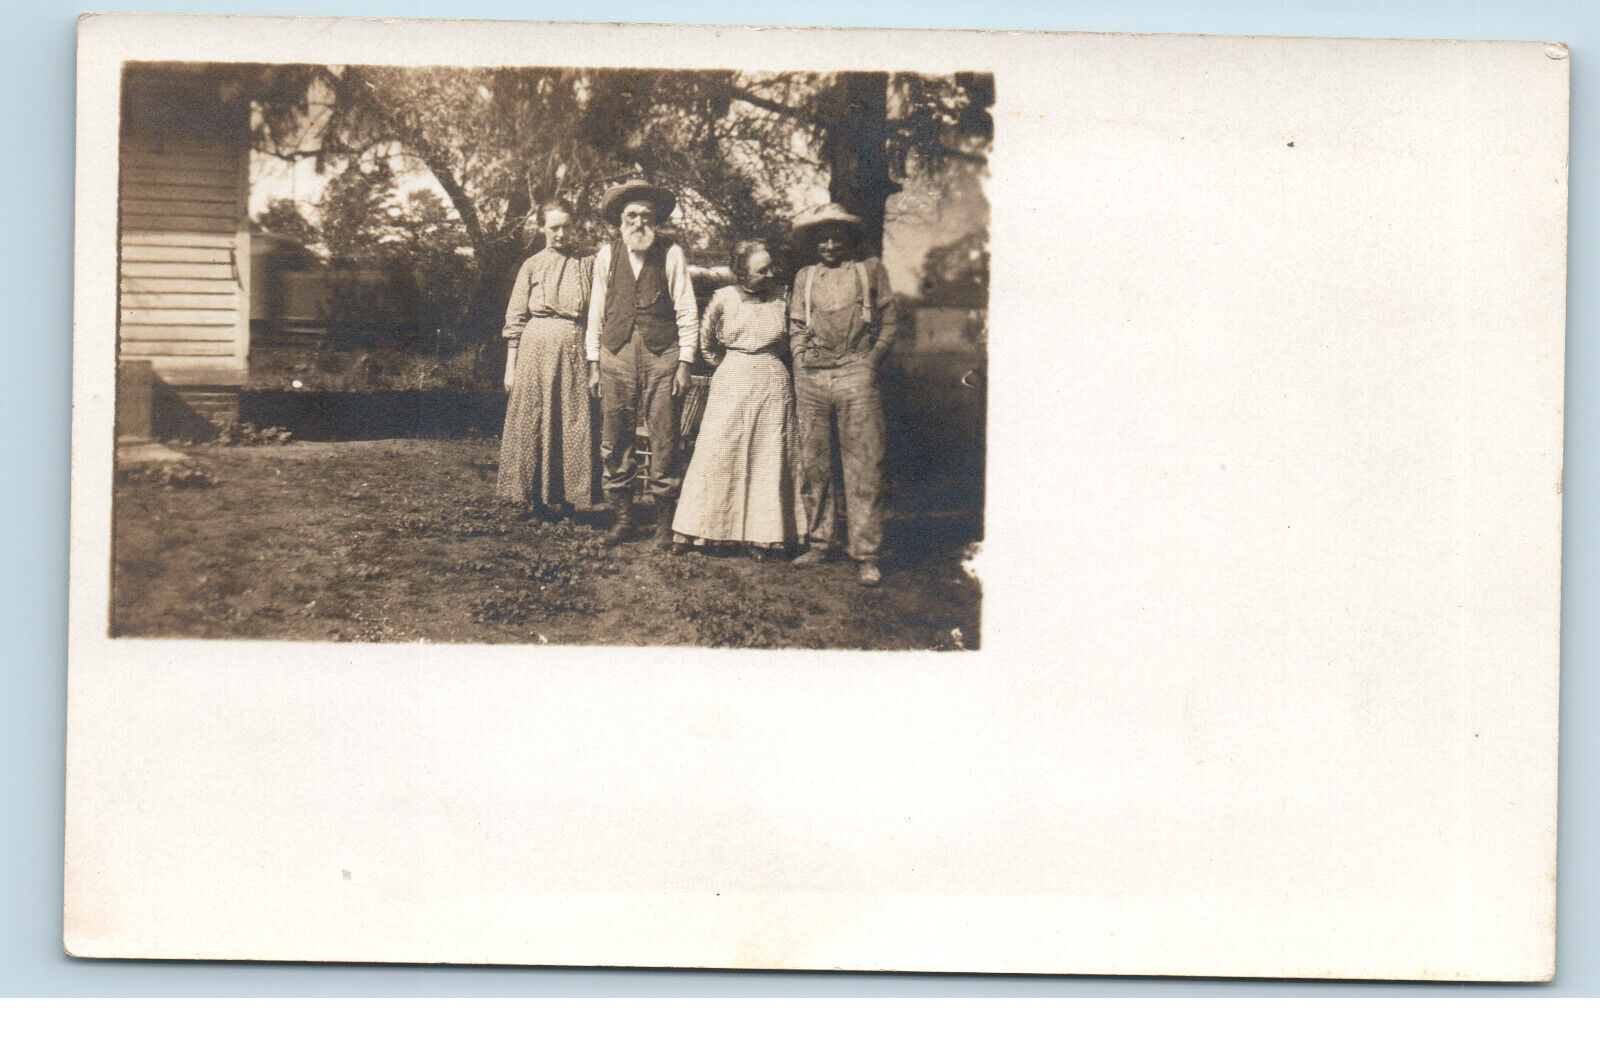 Hillbilly Family Early 1900s Vintage RPPC Real Photo Postcard D77